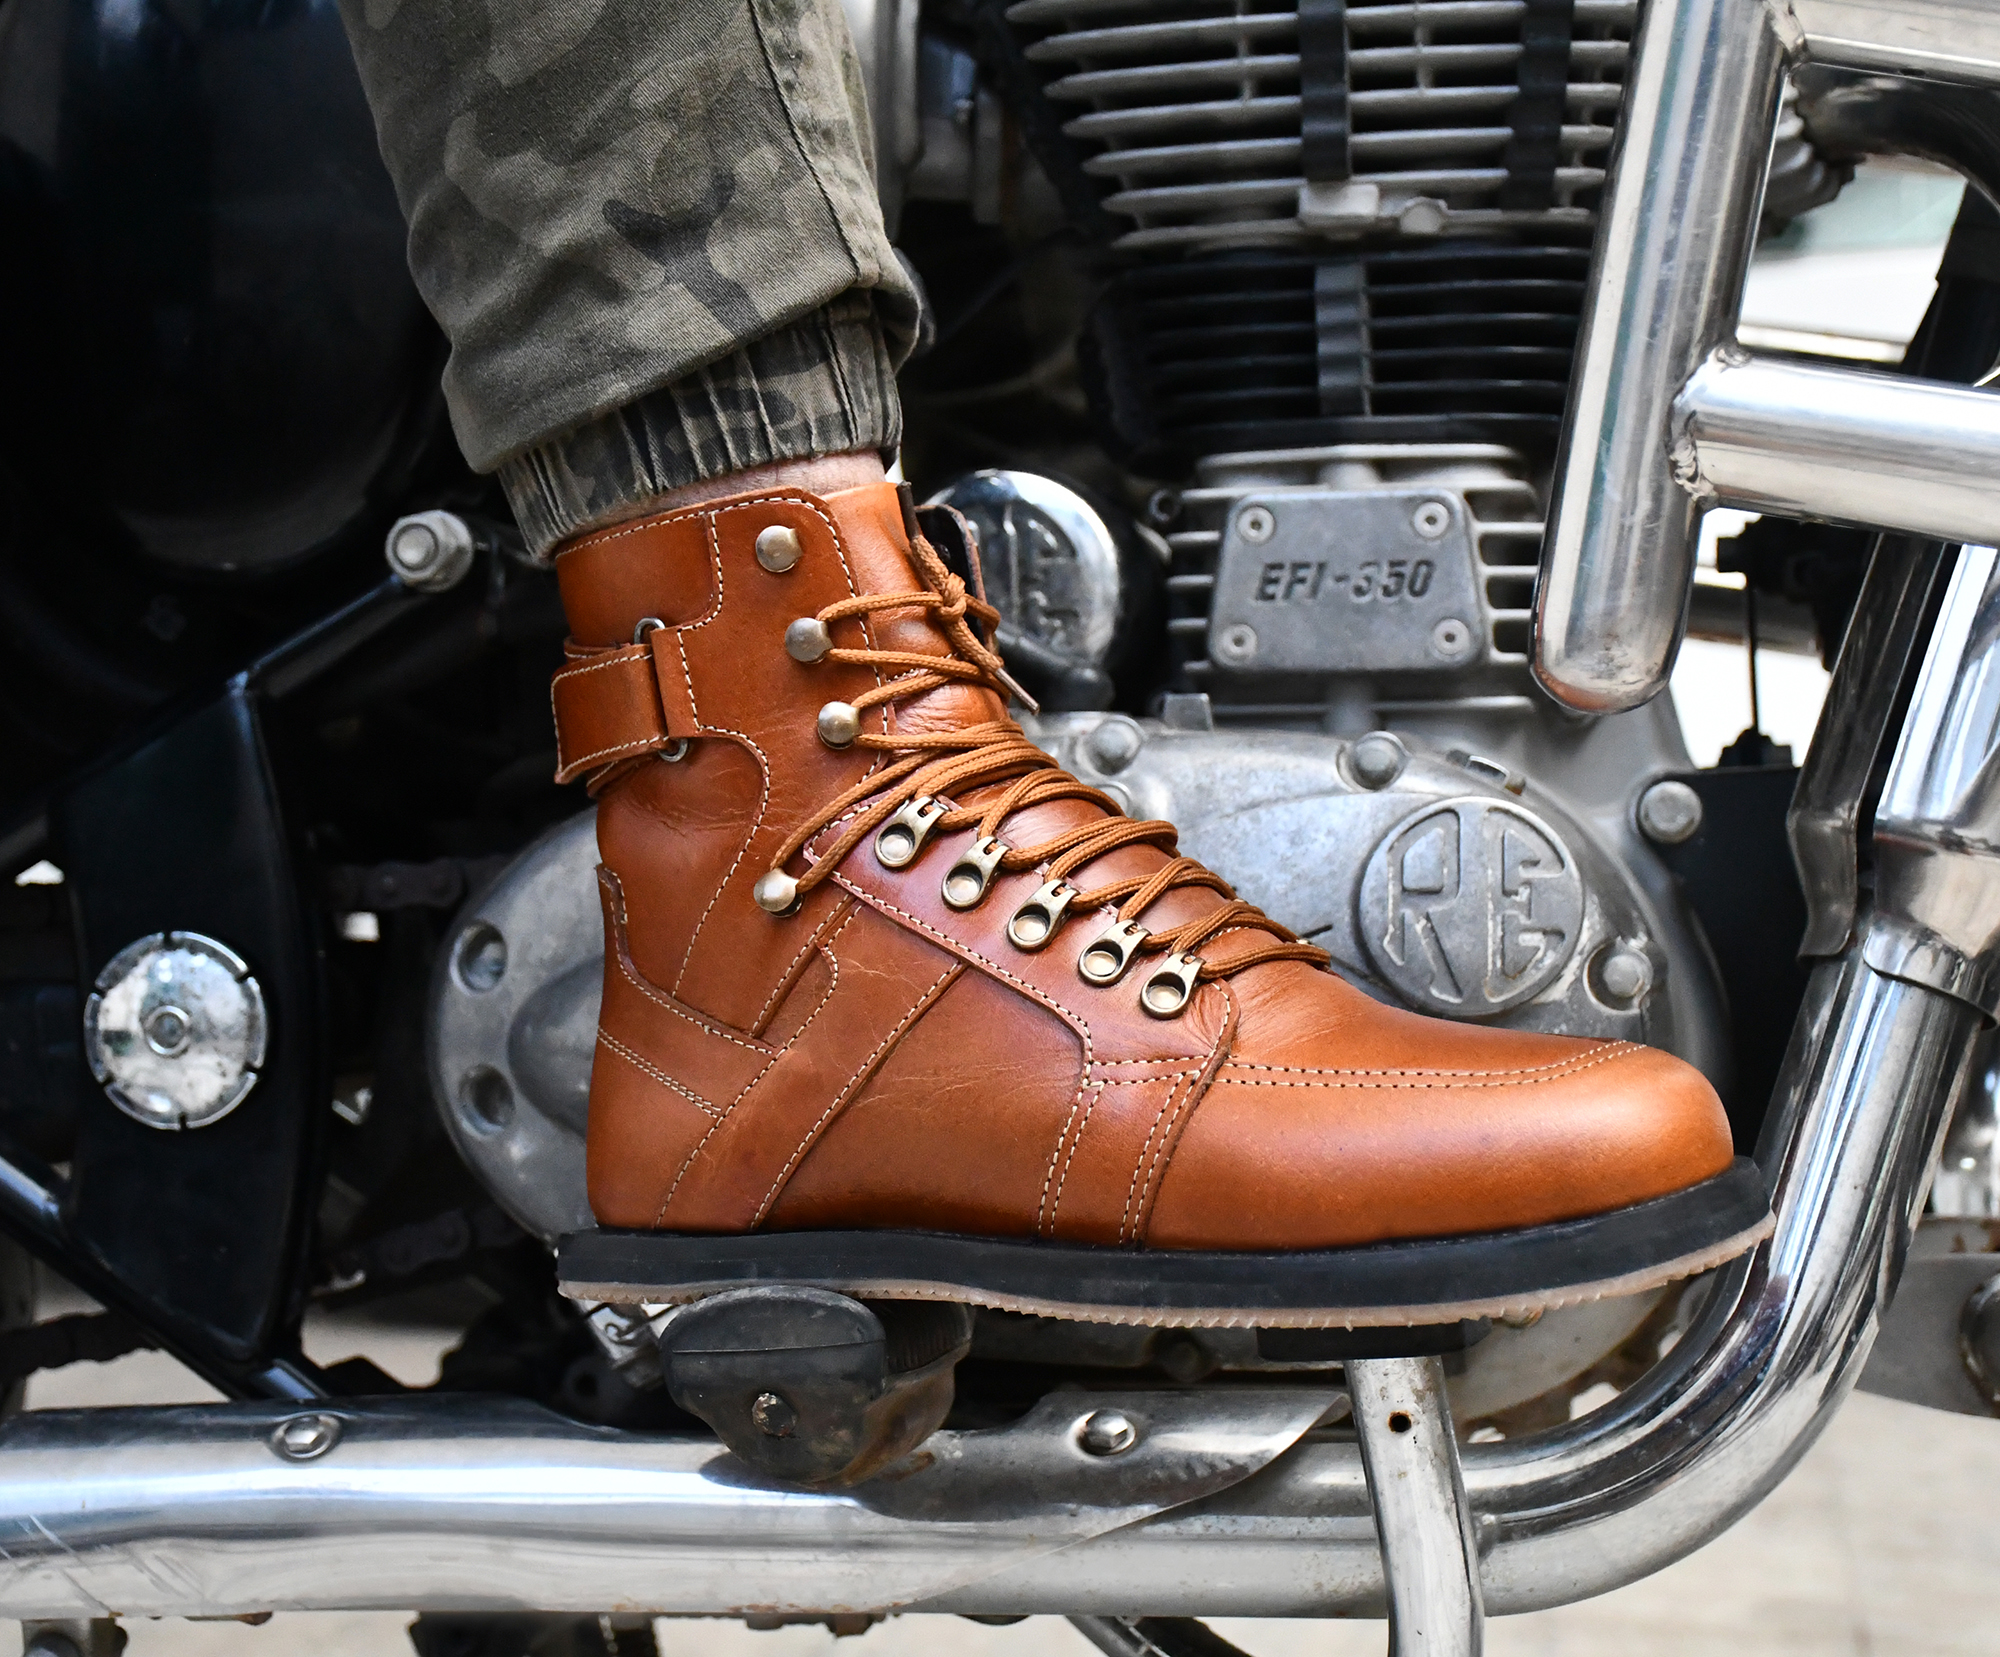 Biker Boots : Urban Boots for Bikers with heavy duty Rubber Sole by ASM. Article : Biker01-Tan